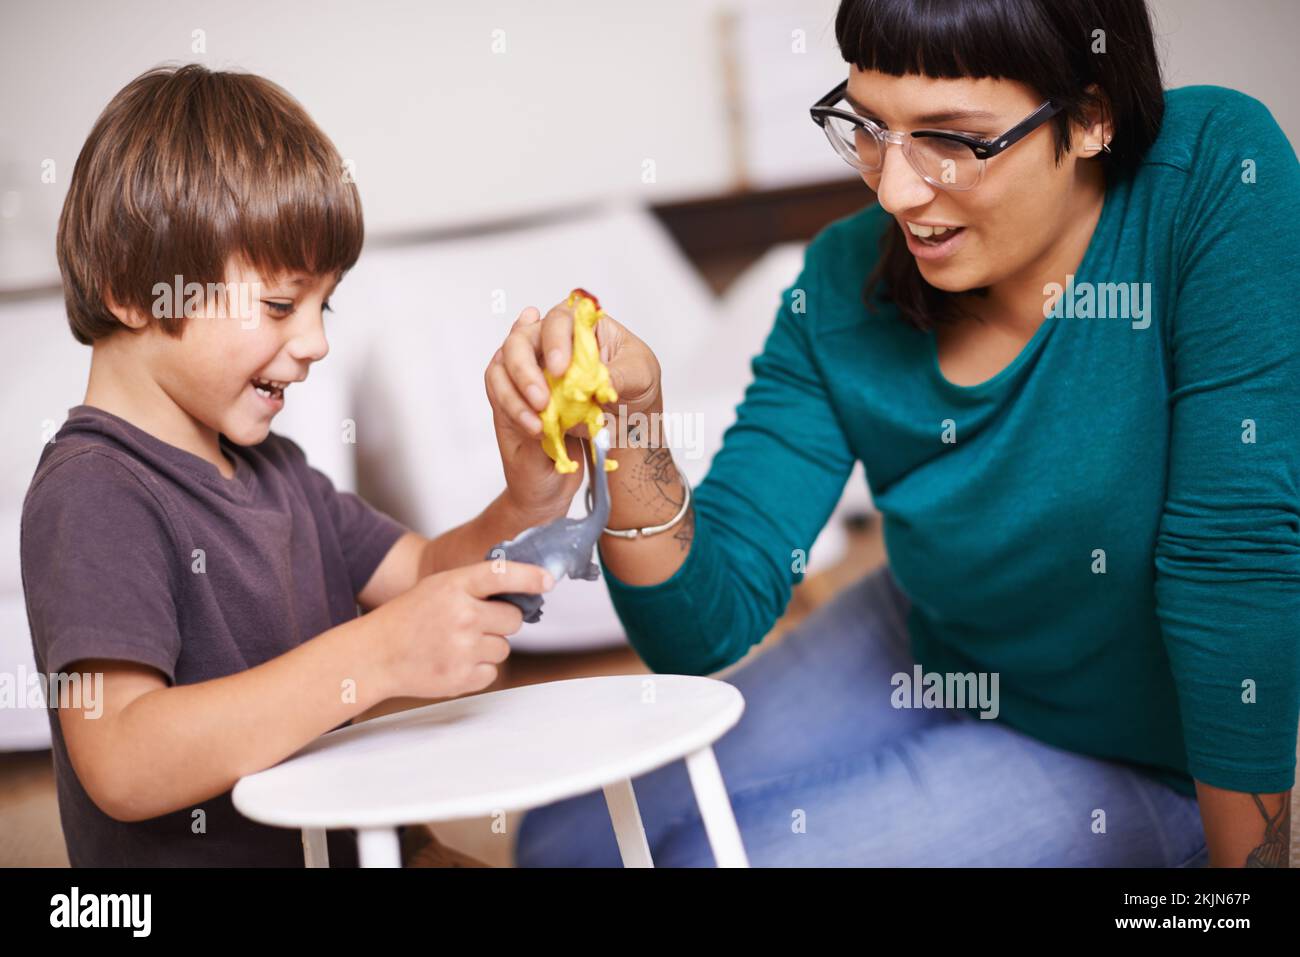 Communicating with each other using dinosaurs. a mother and her son playing with toy dinosaurs. Stock Photo